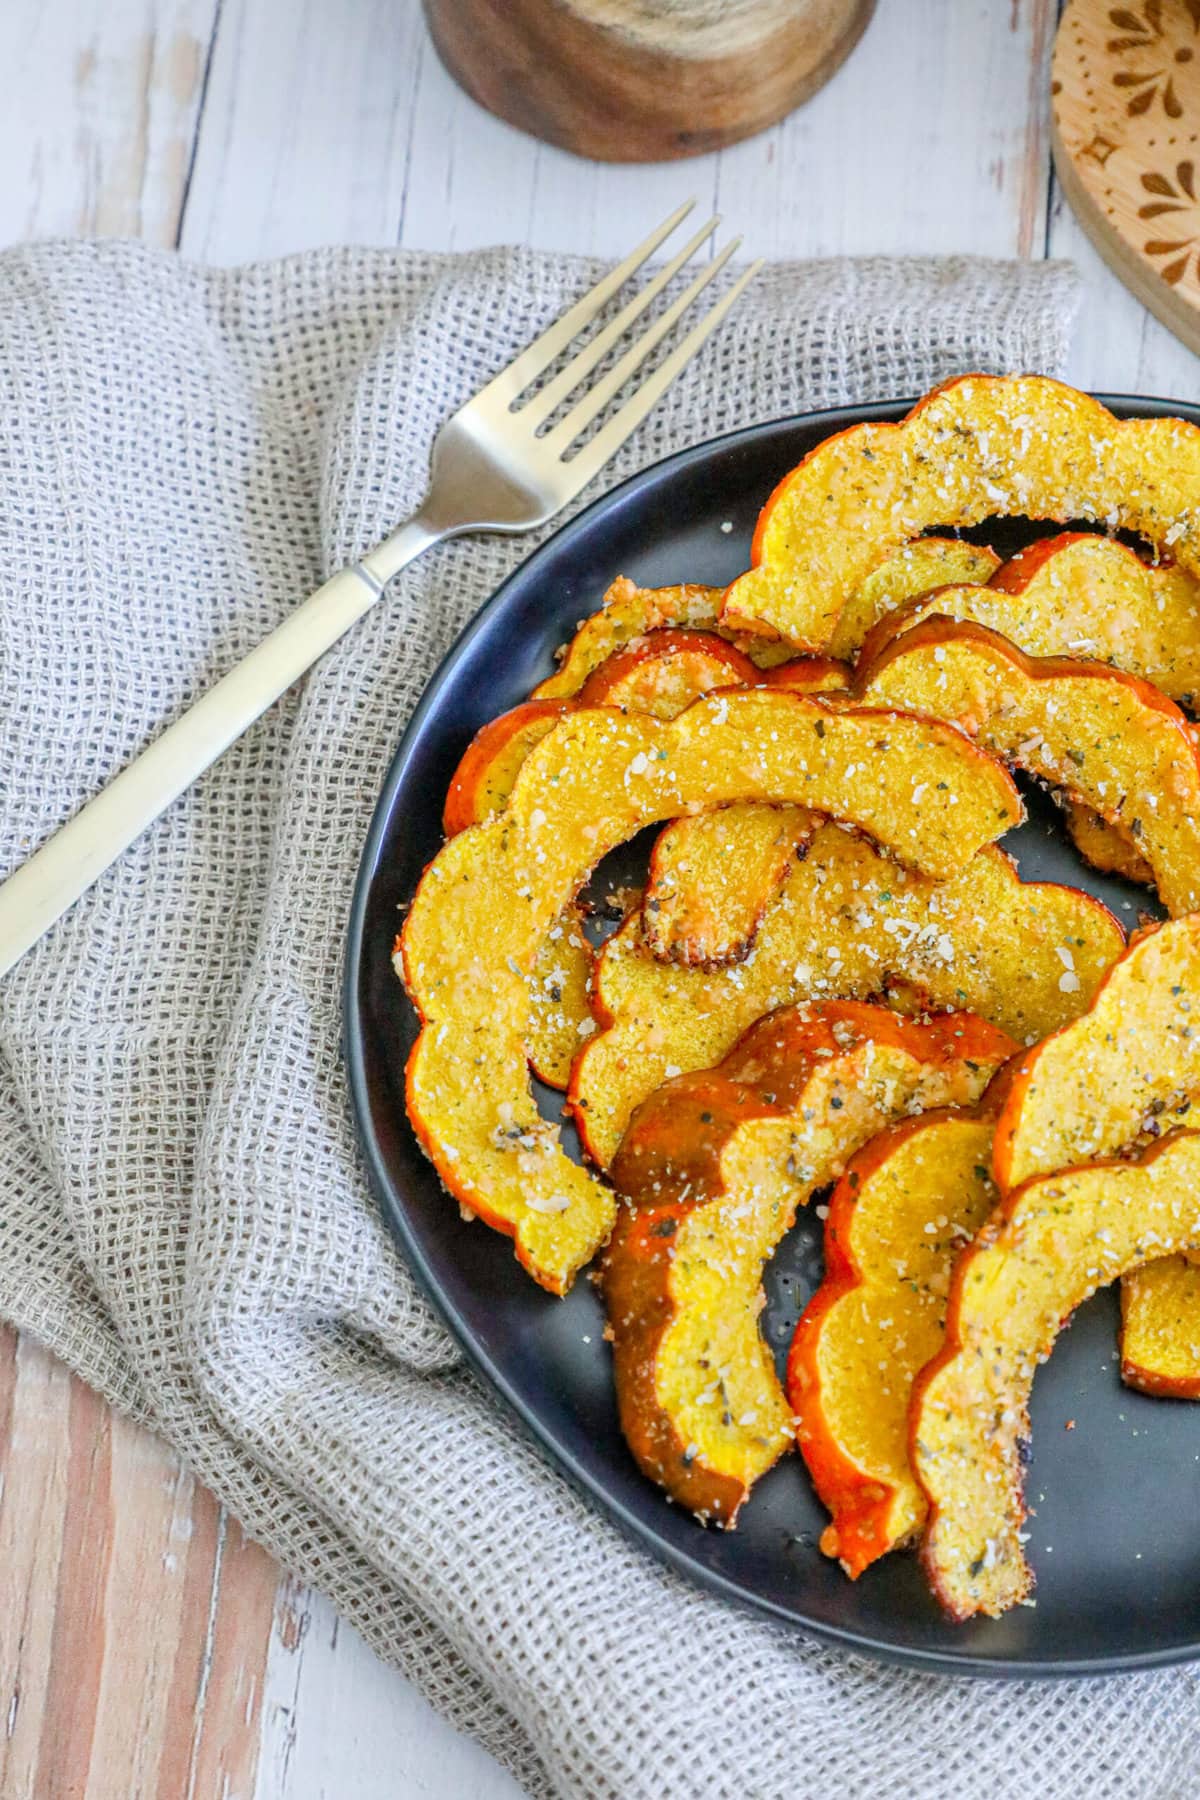 picture of roasted acorn squash slices seasoned with herbs and spices on a black plate